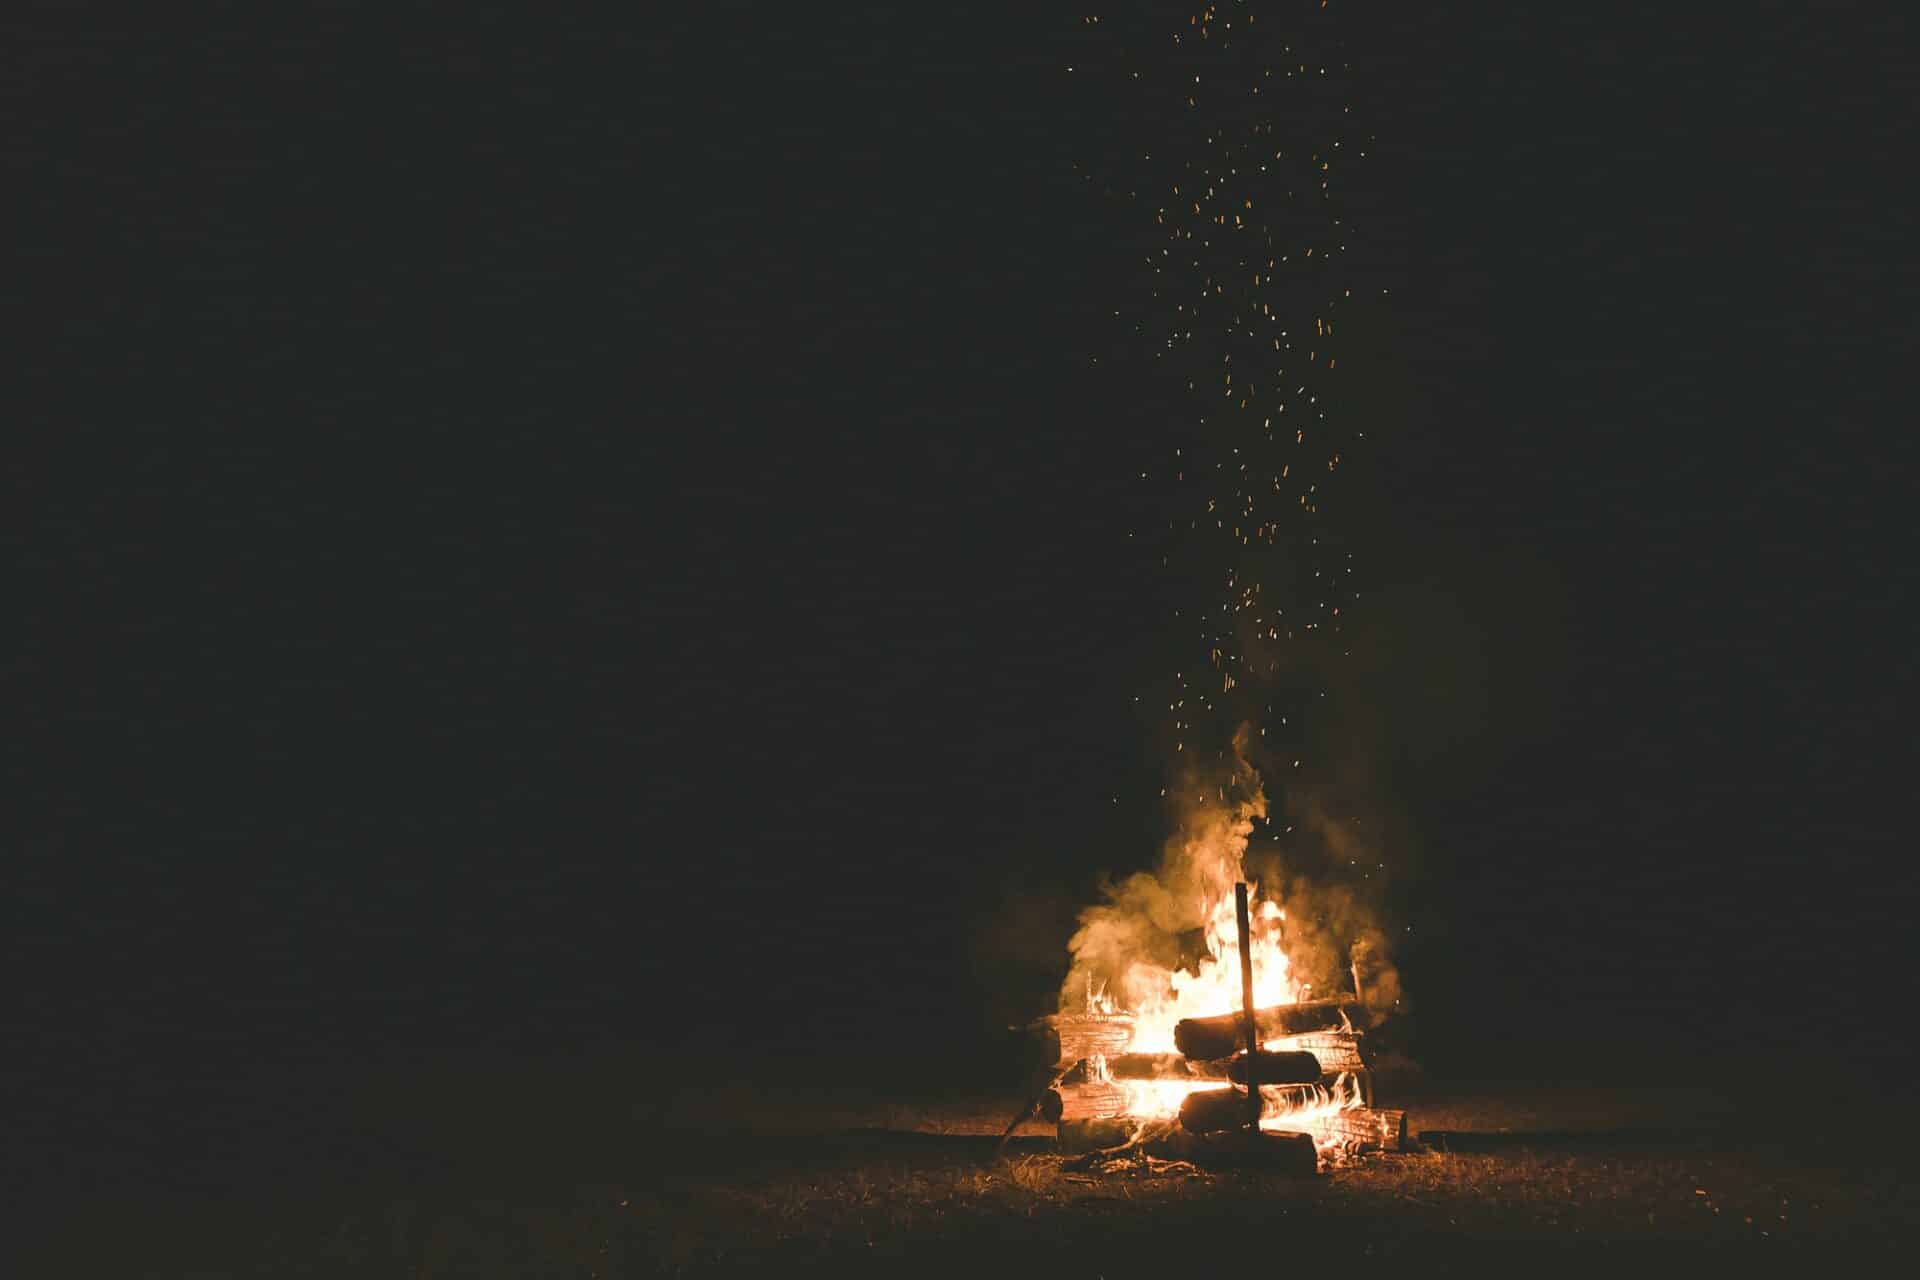 A campfire with sparks flying around in the dark night